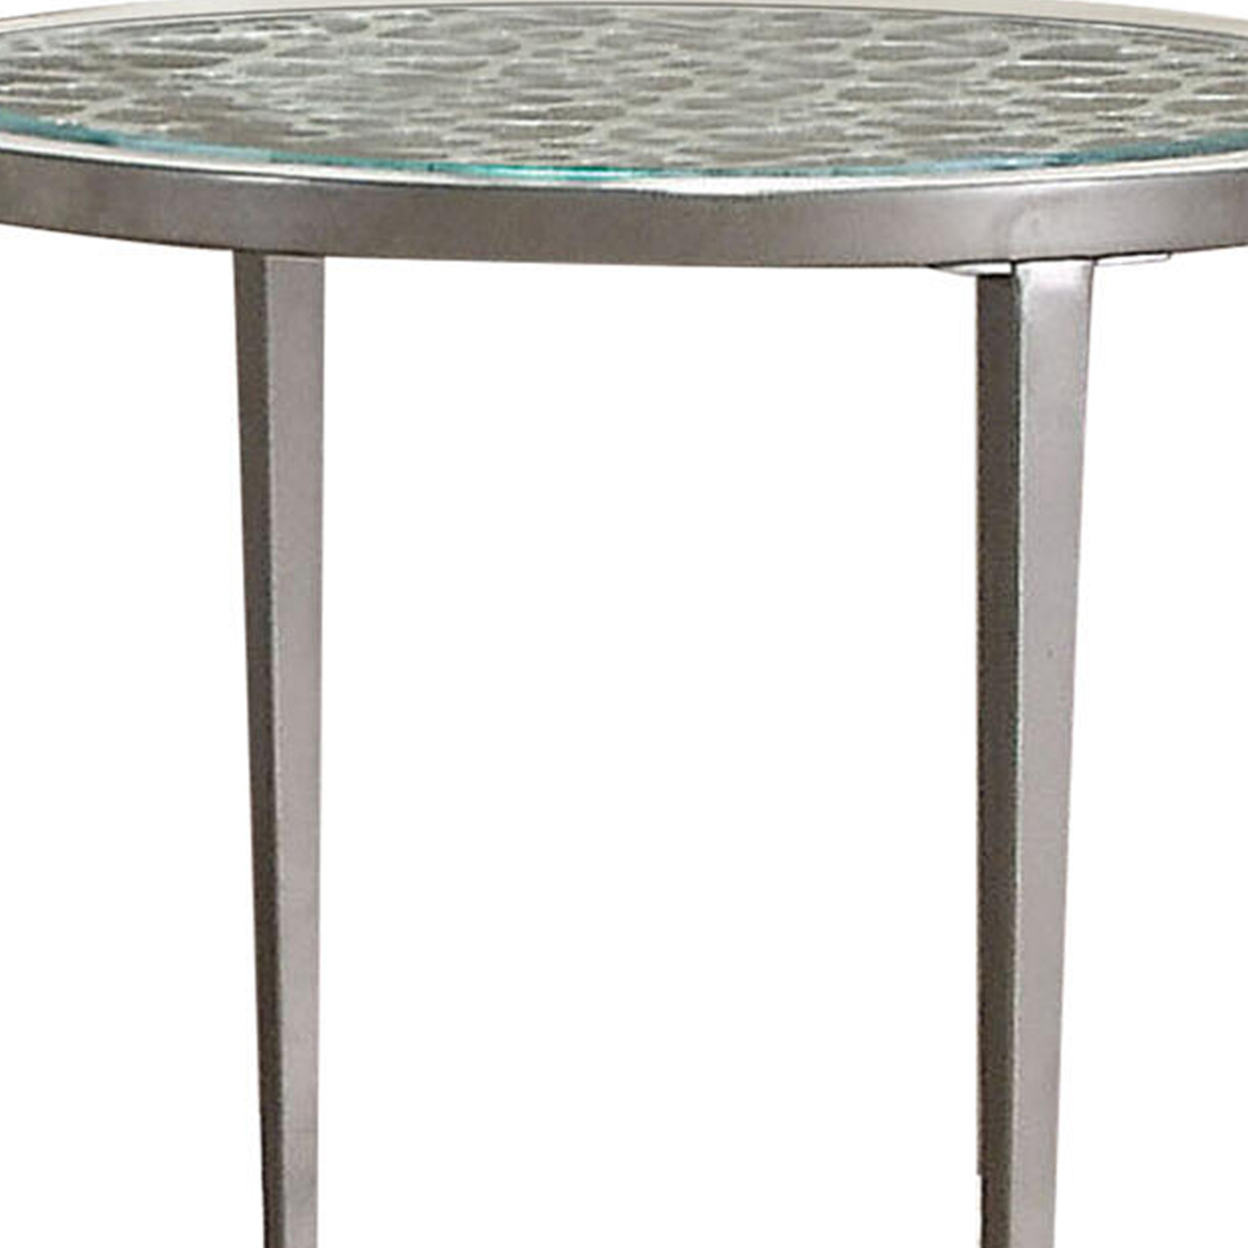 Round Glass Top Metal End Table With Sleek Tapered Legs, Silver- Saltoro Sherpi